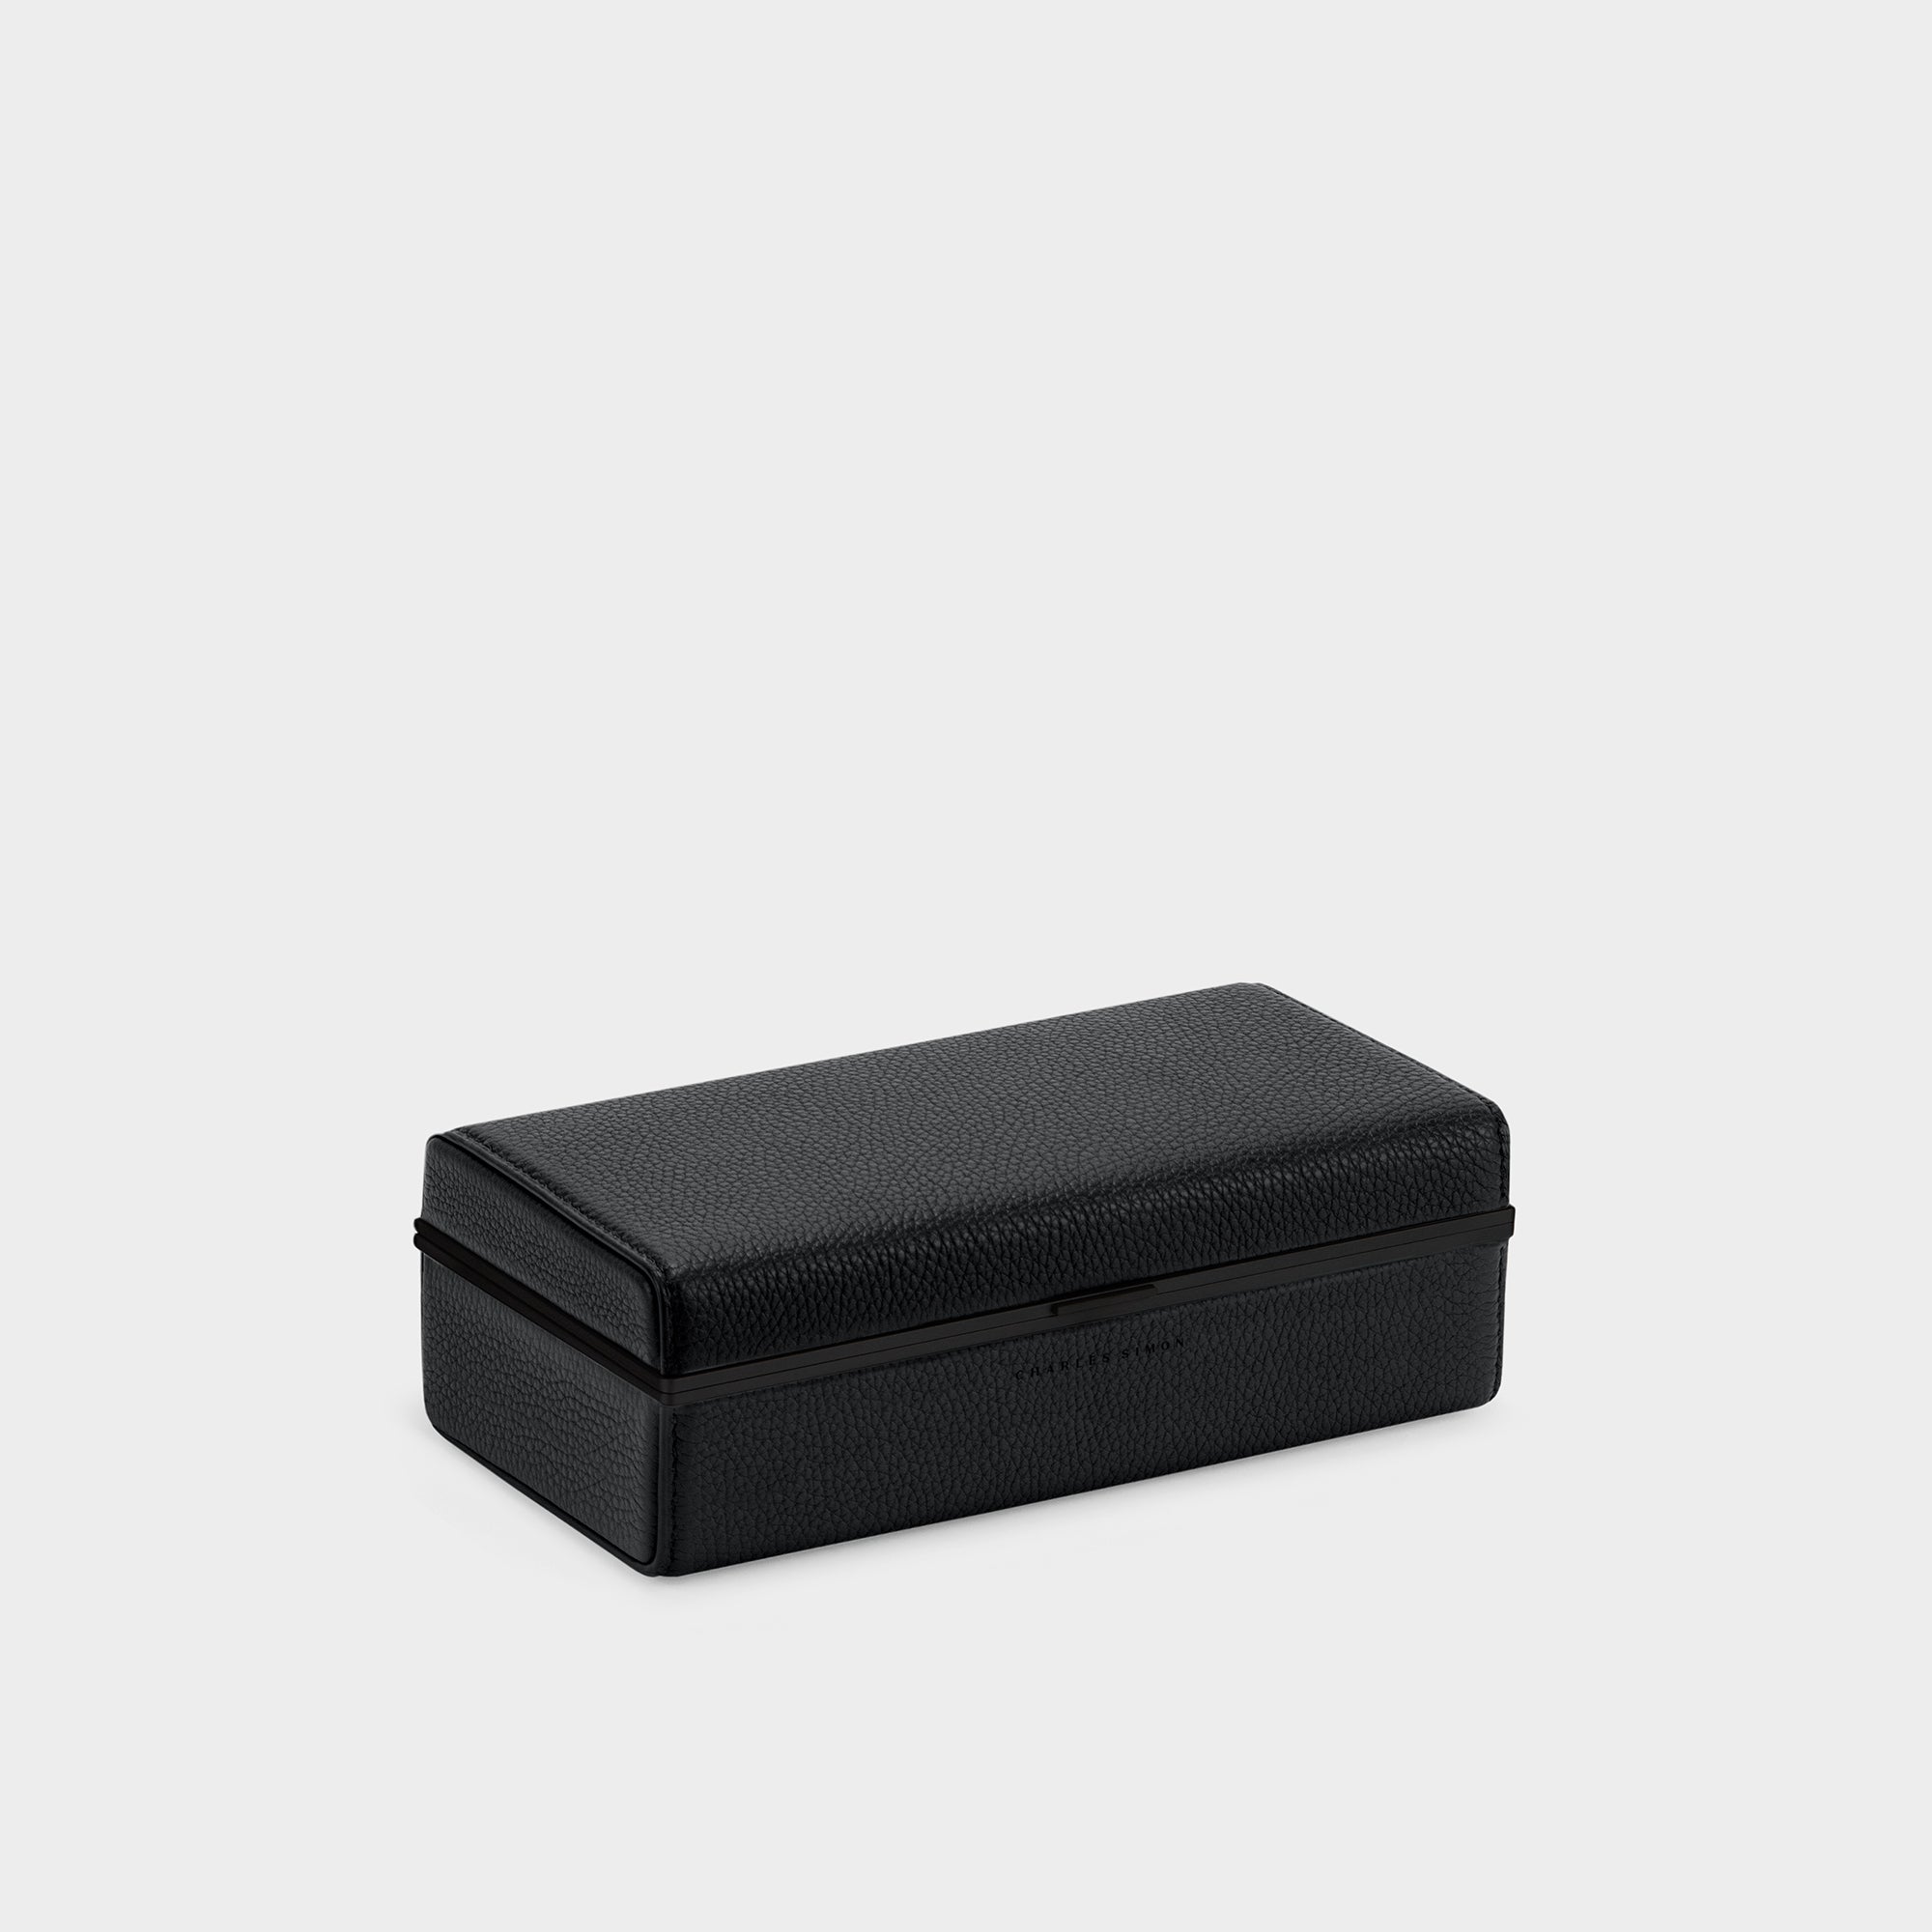 Charles Simon Eaton 3 luxury watch case in all black. Made by hand in Canada.